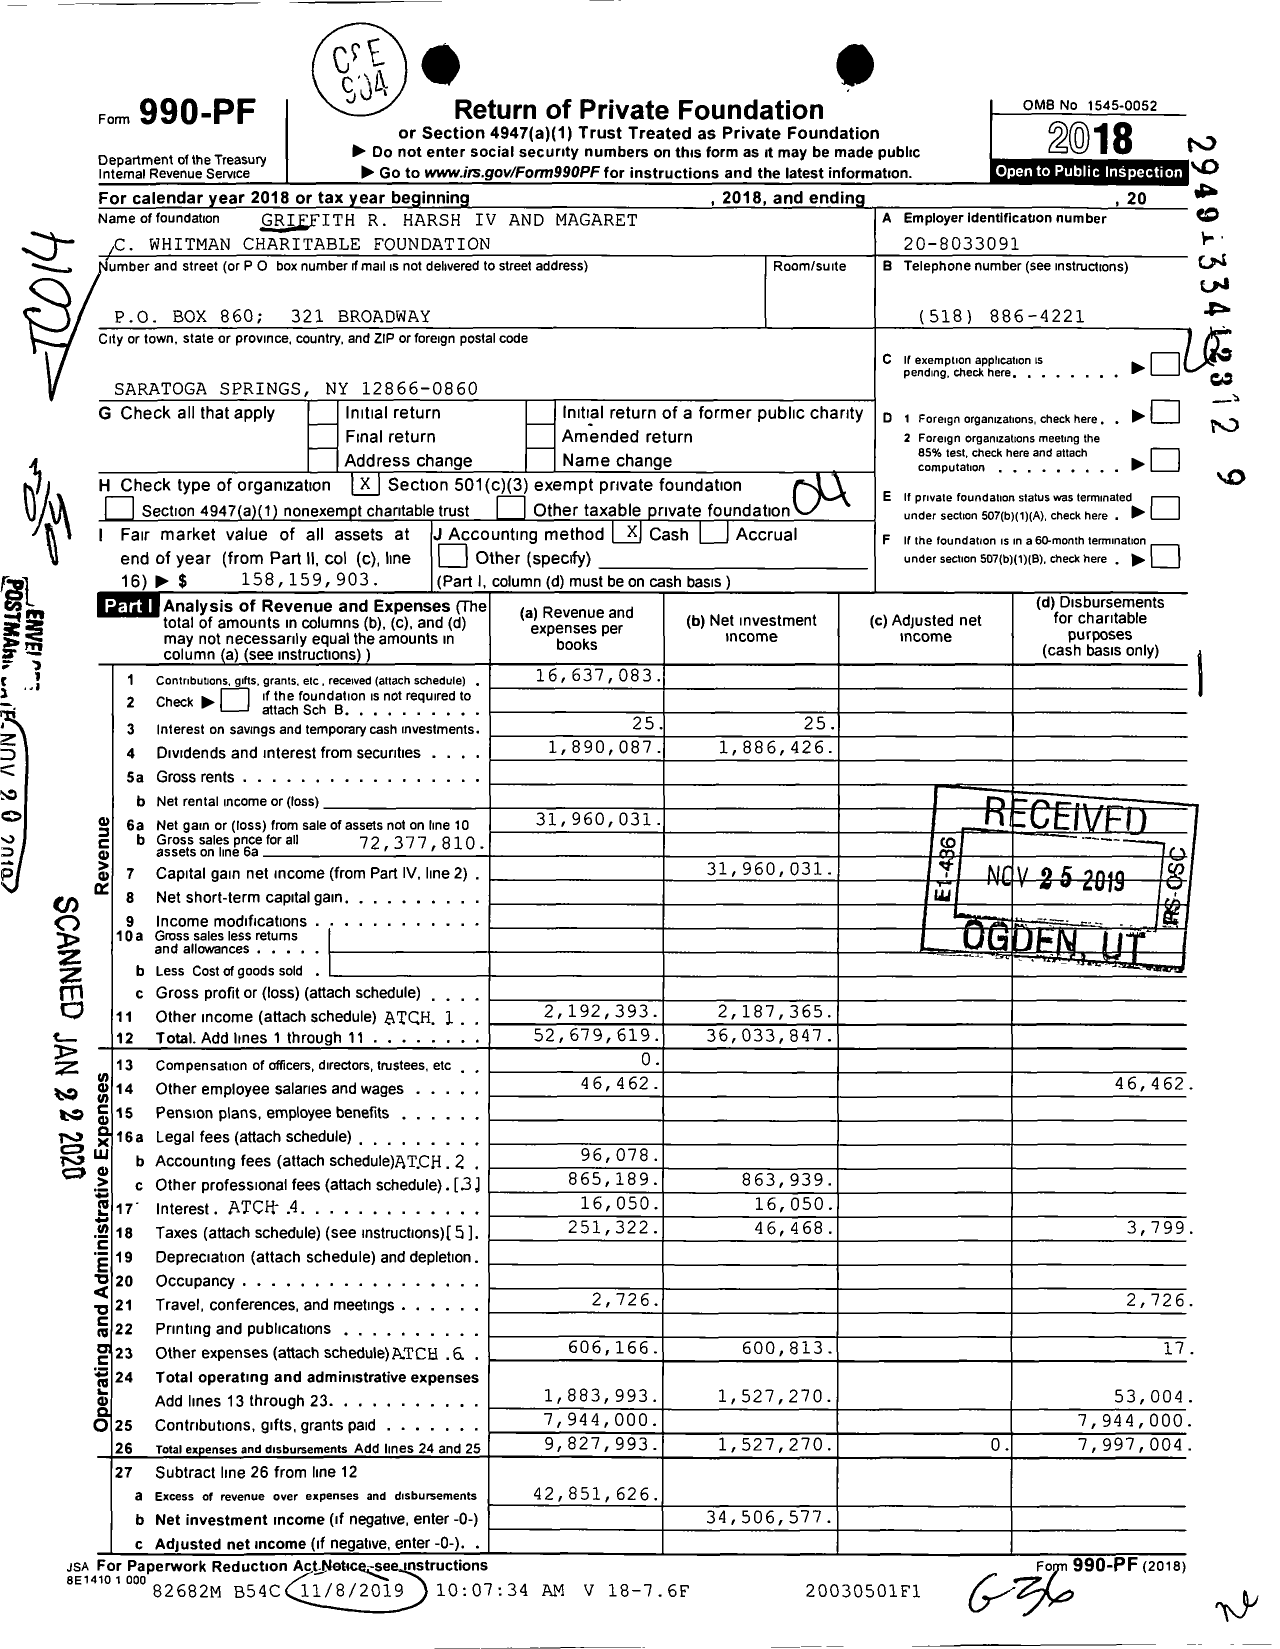 Image of first page of 2018 Form 990PF for Griffith R. Harsh IV and Margaret Cwhitman Charitable Foundation